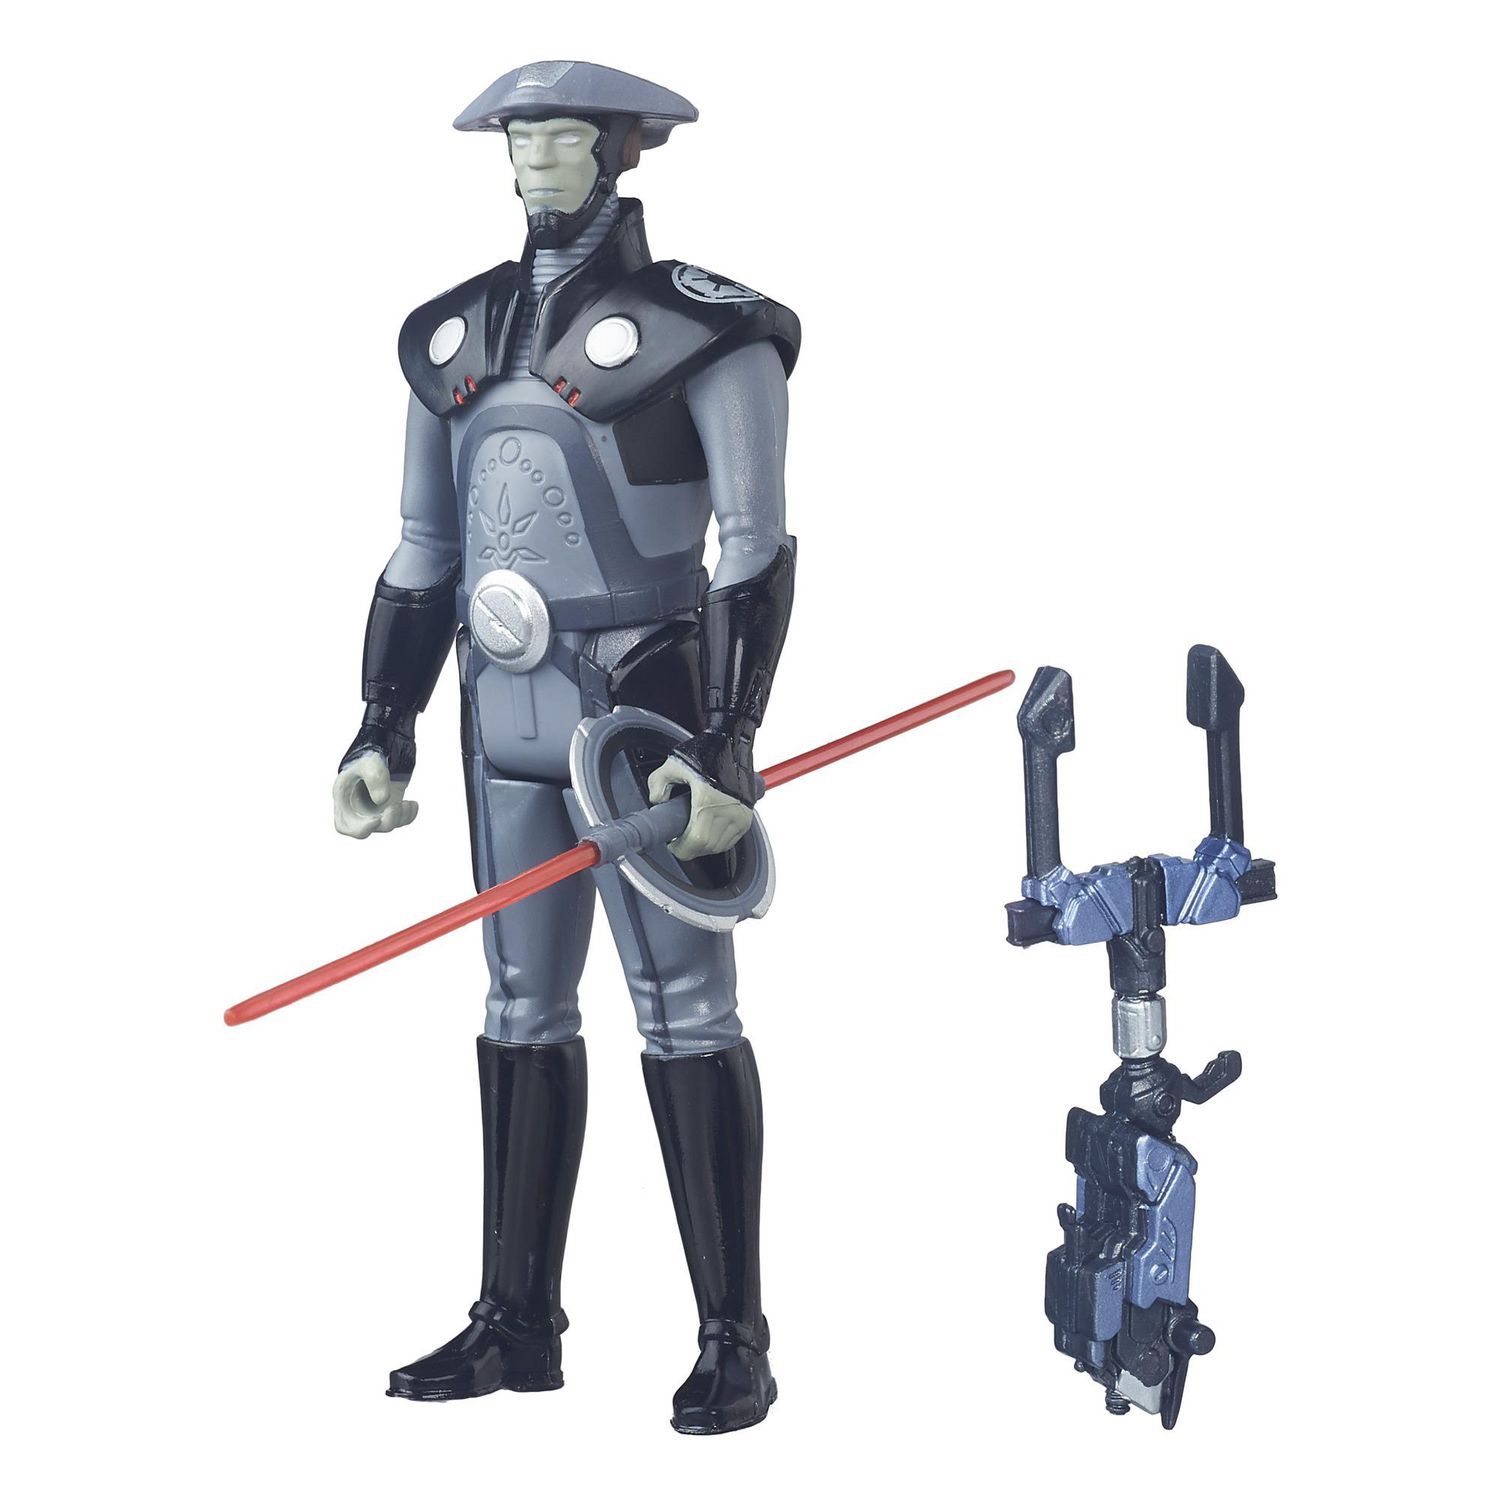 Star Wars Rebels HERO Series Fifth Brother Inquisitor Action